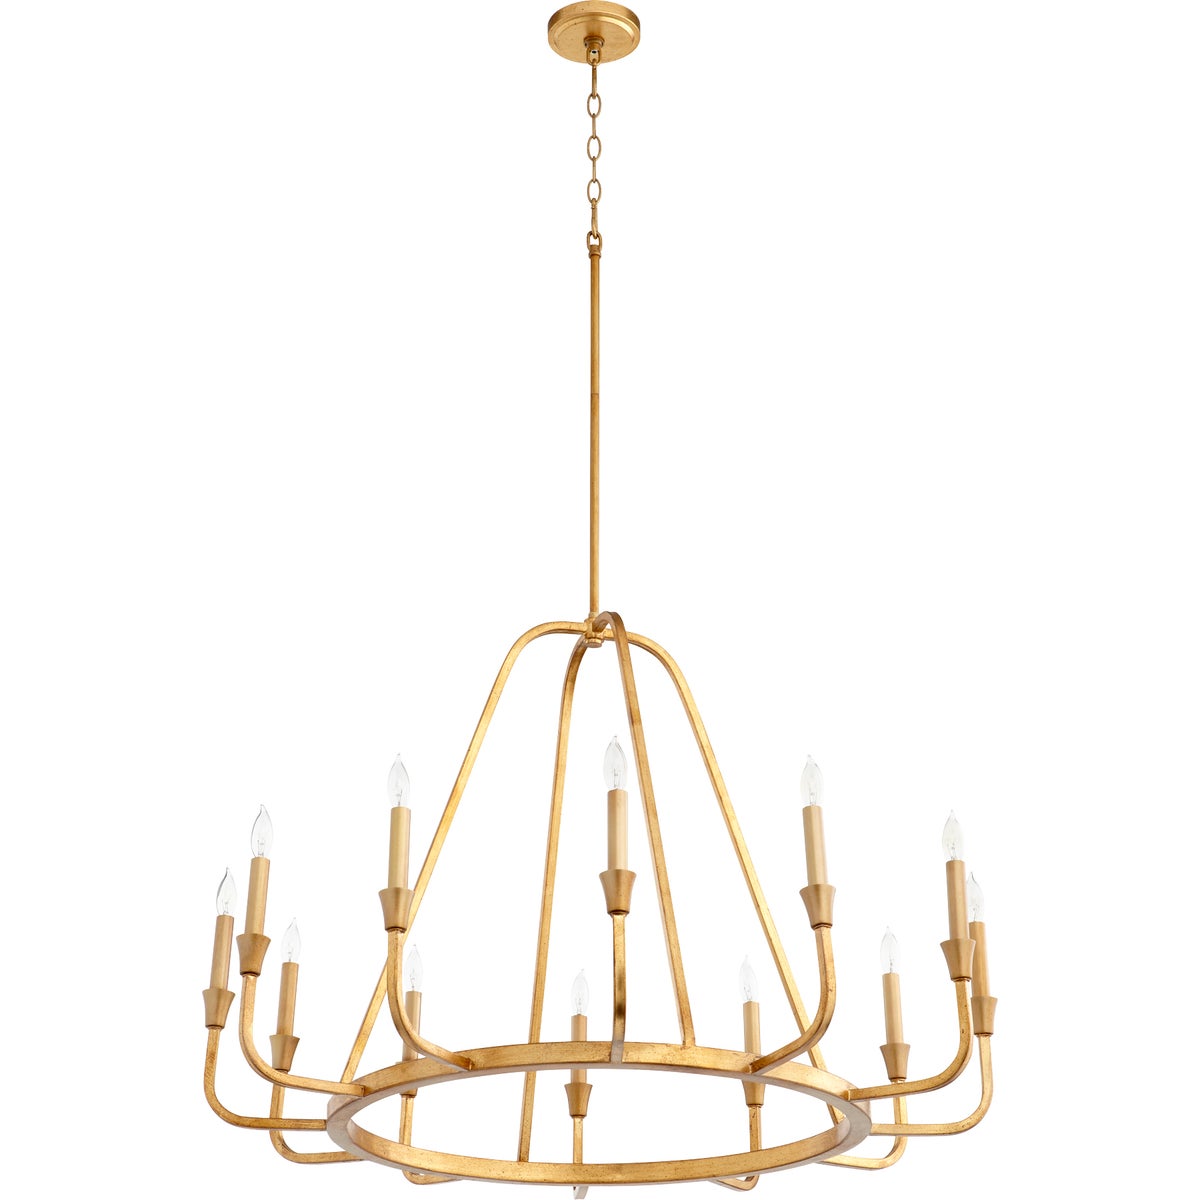 Gold Chandelier with 12 candelabra bulbs, a classic form, and a striking gold leaf finish. Generous size, open design, and solid finish ensure it won’t overwhelm your space. Perfect for adding brightness and sophistication to any room.